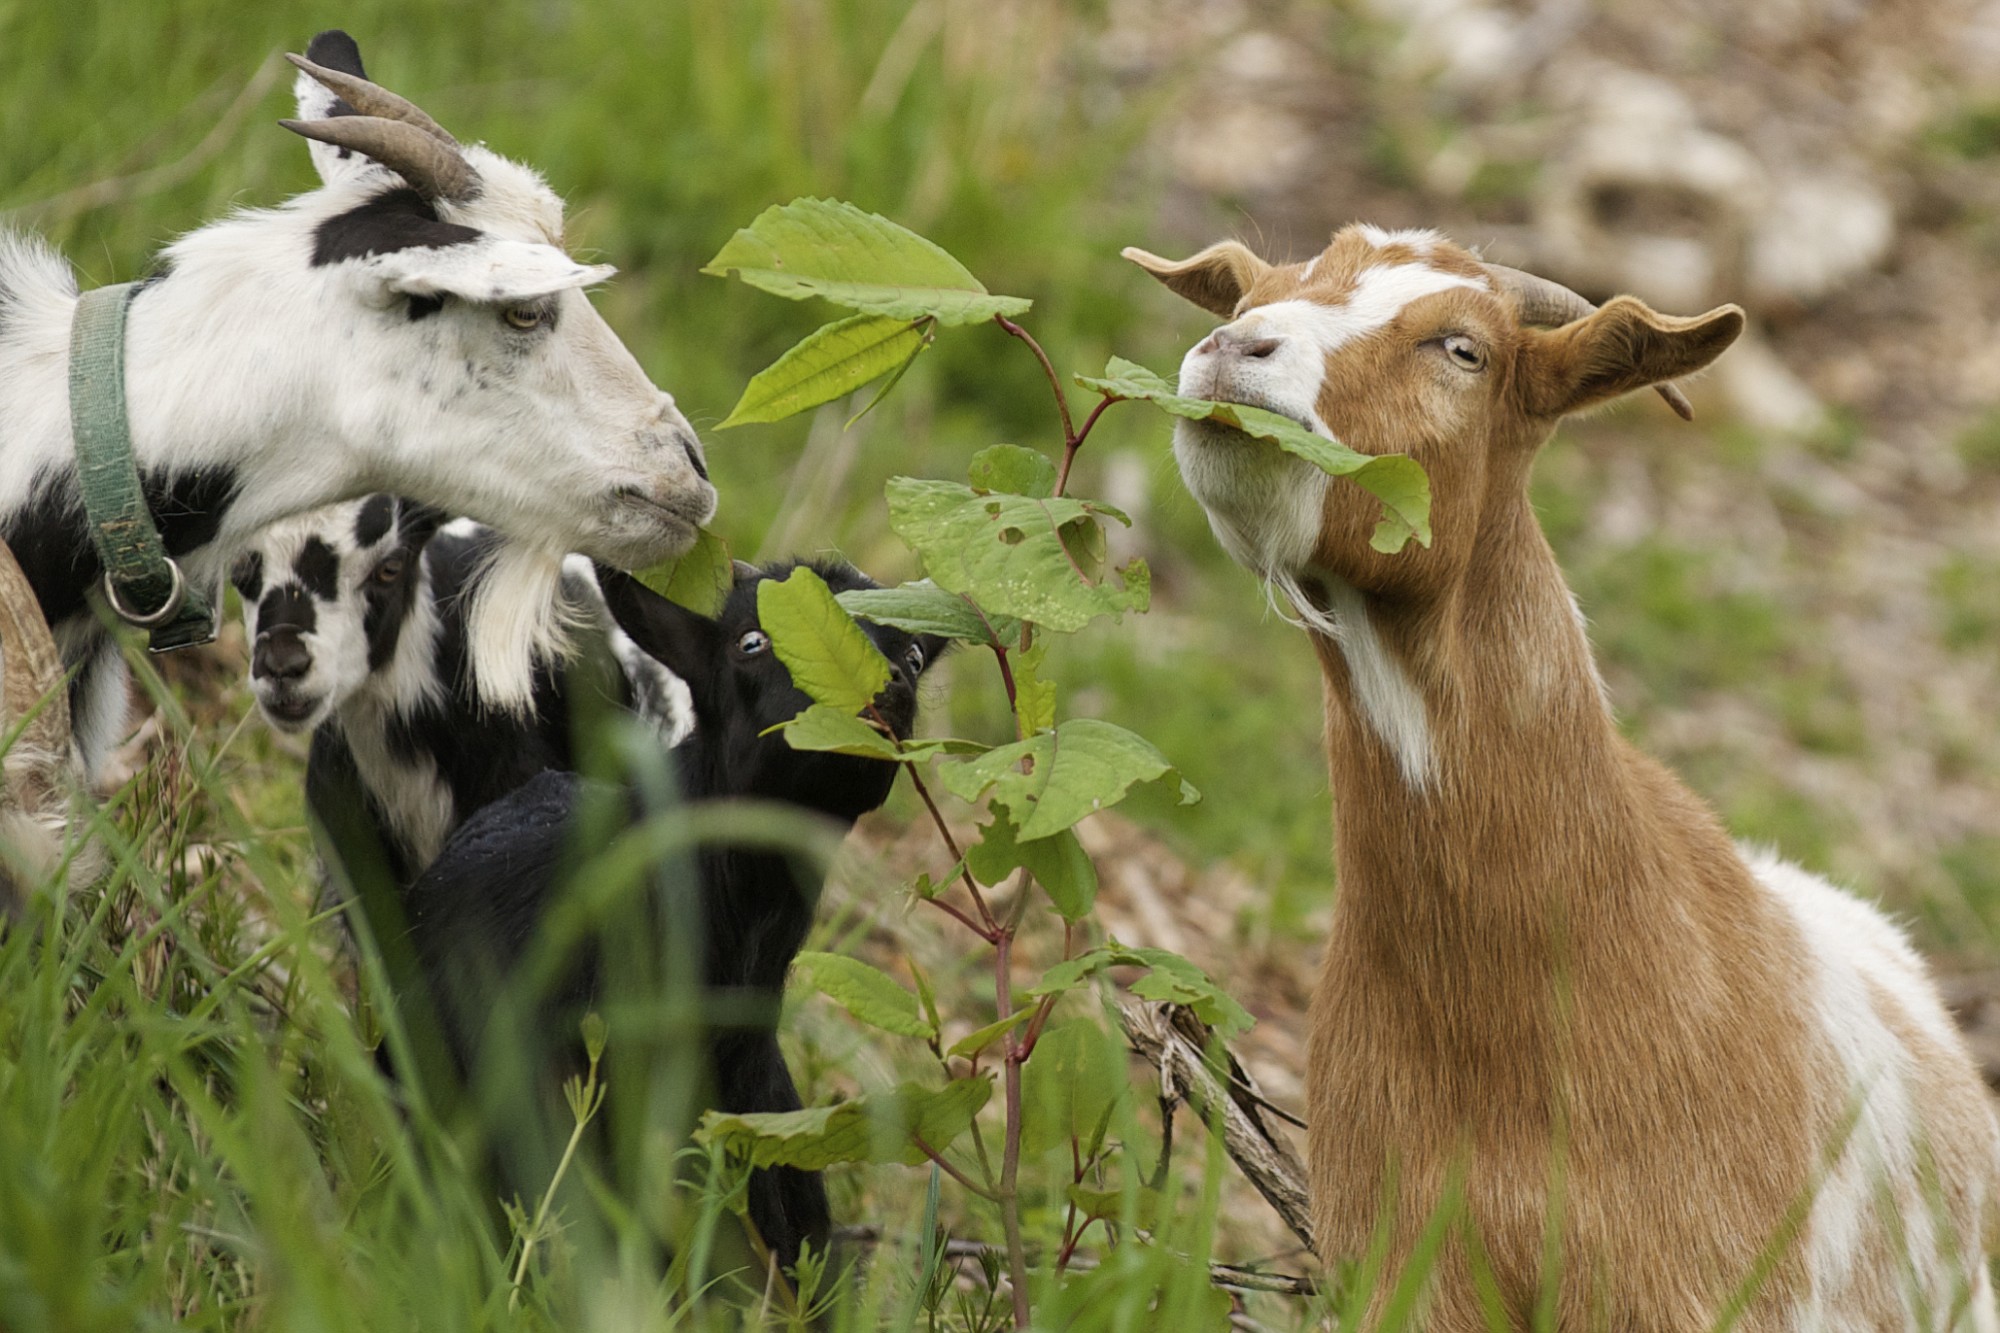 The Washington State Department of Transportation on Wednesday dispatched a herd of goats to control weeds at a stormwater facility along state Highway 503 in Brush Prairie.